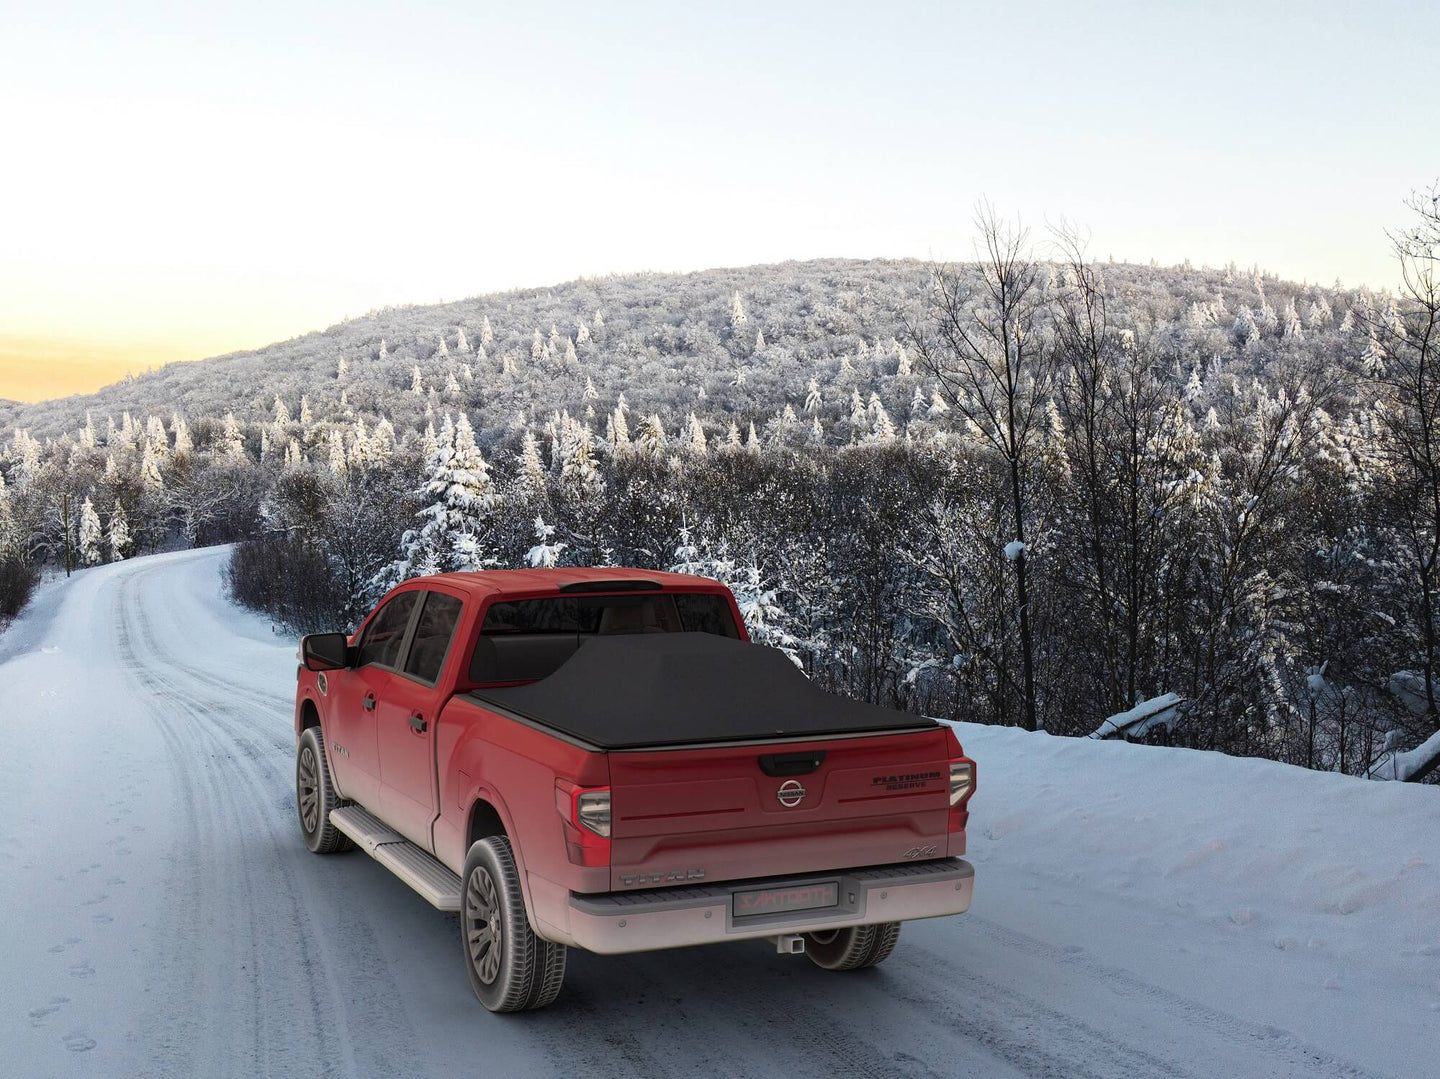 Red Nissan Titan with an expanded Sawtooth Tonneau on a snowy mountain road